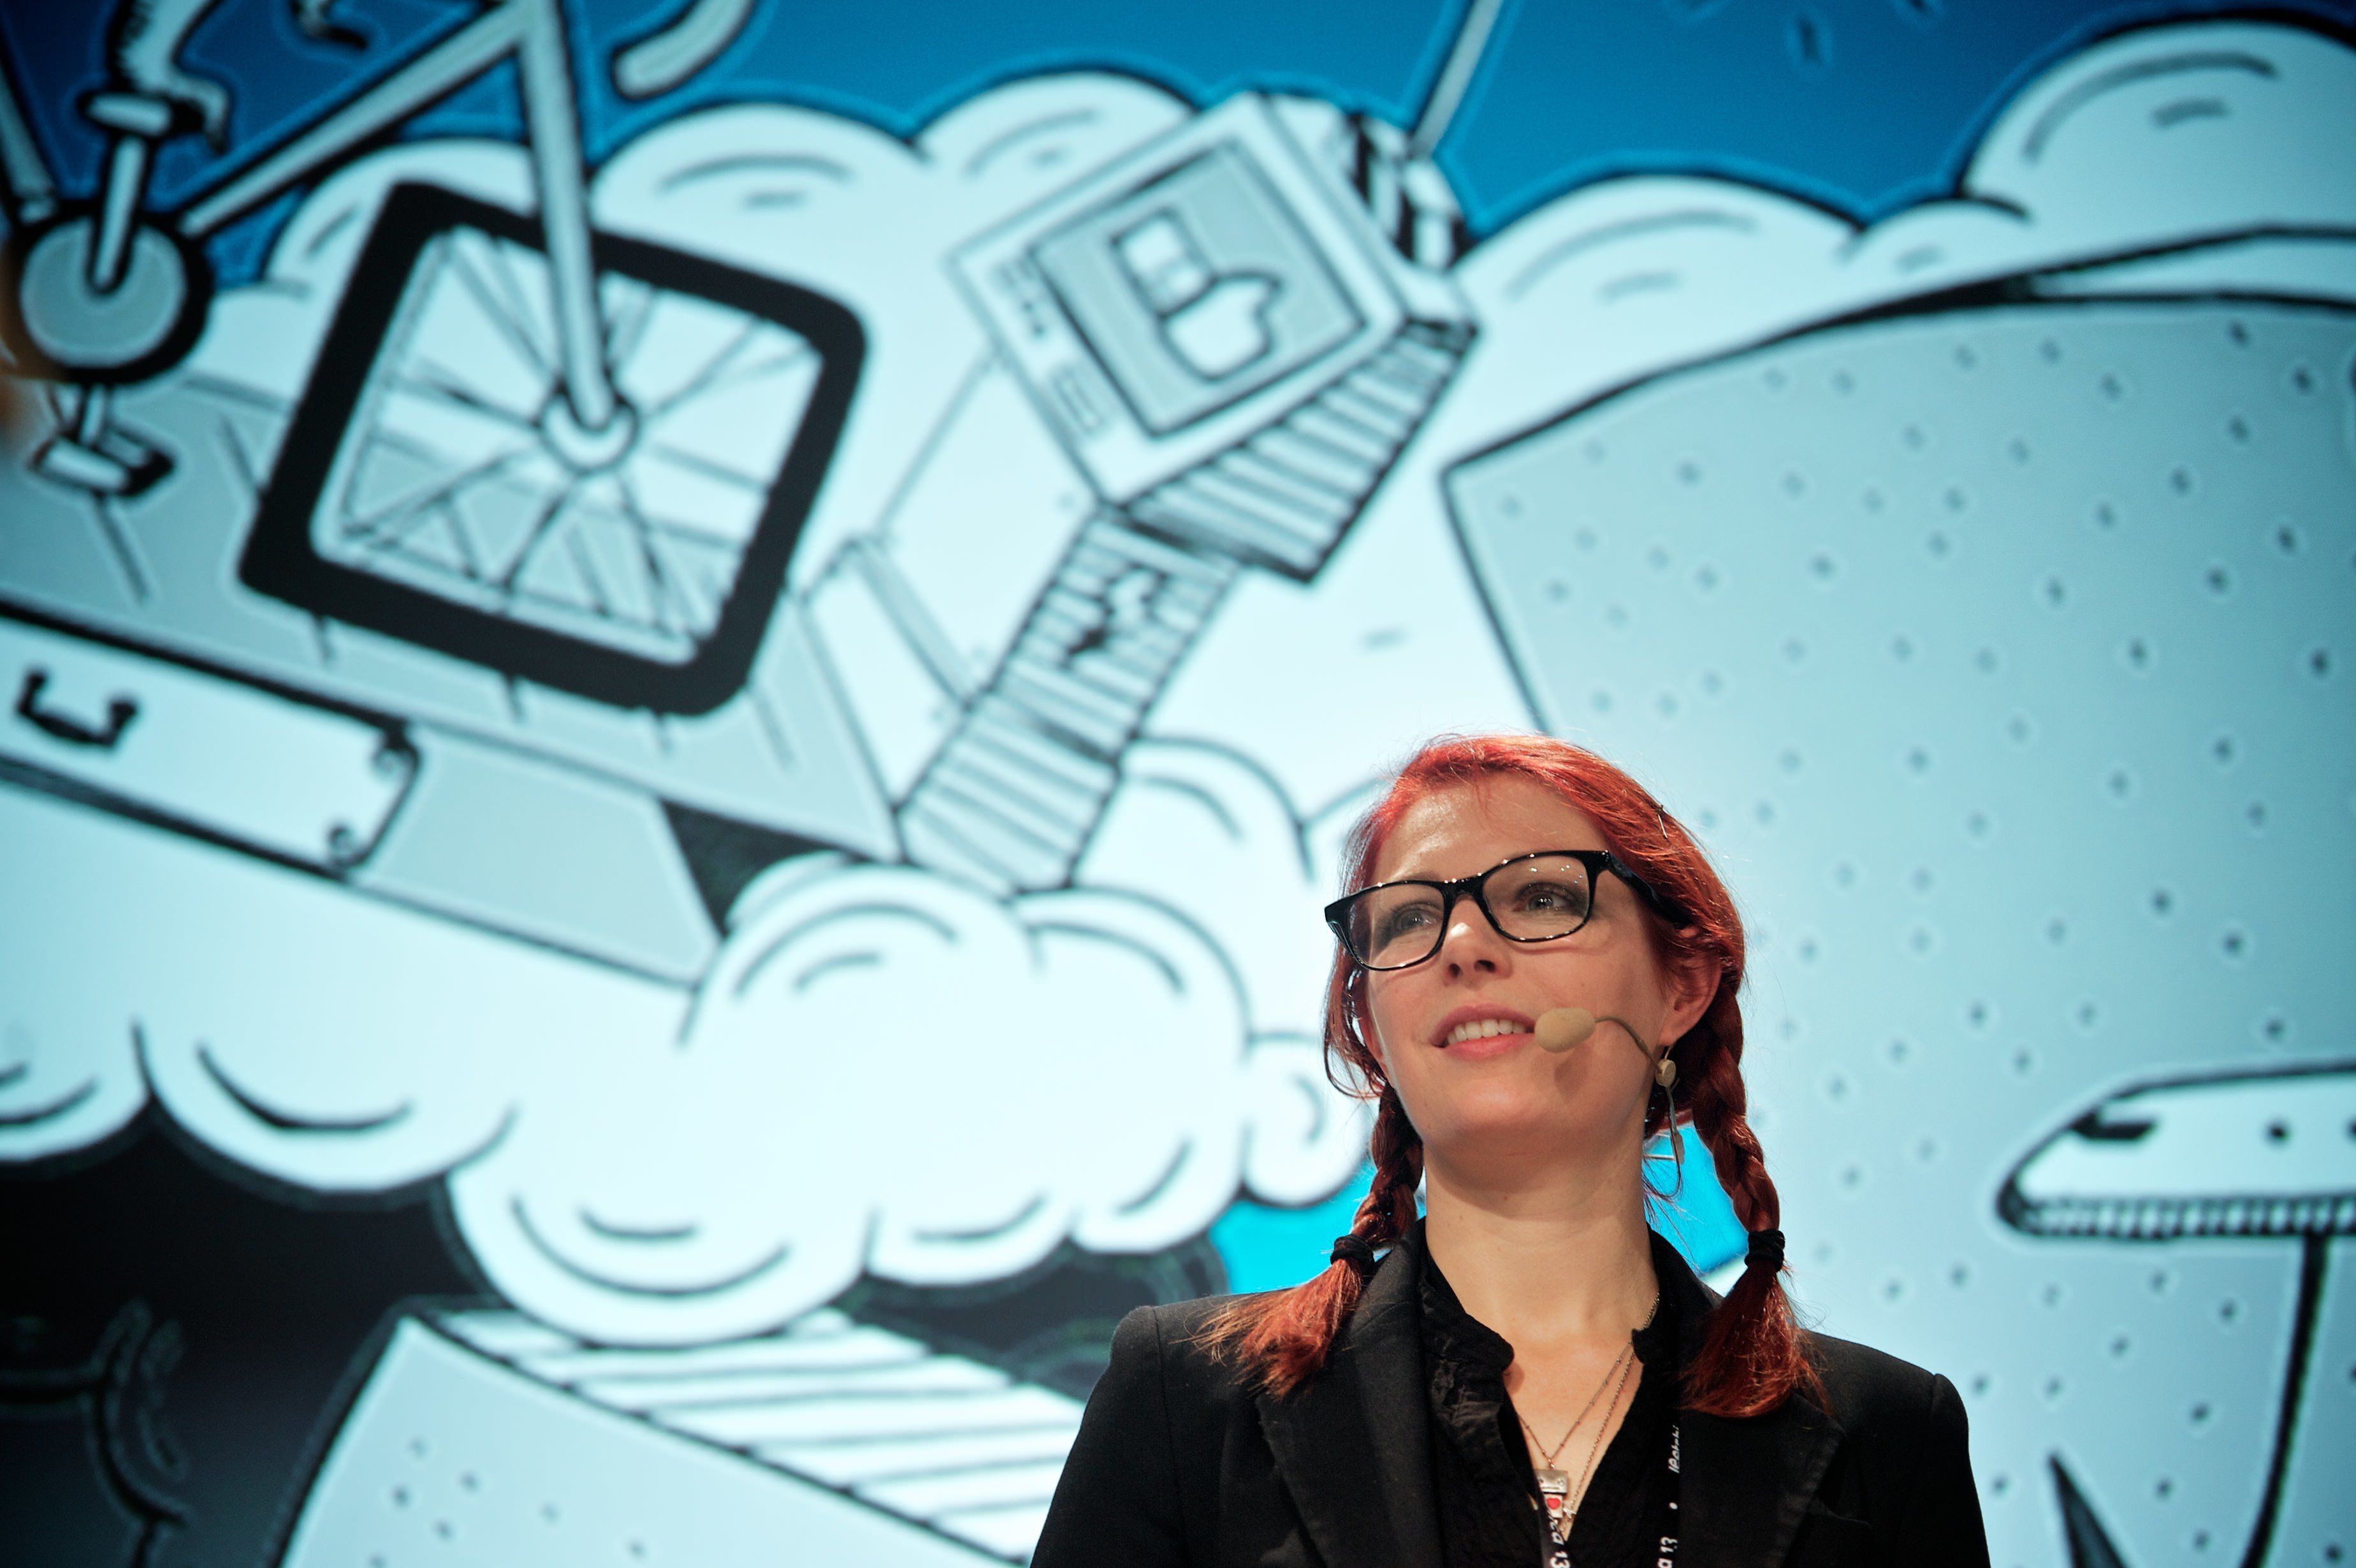 A woman with red colored hair, dark rimmed glasses, and black jacket, speaks at a conference in front of a screen showing comic book style illustrations of robotic contraptions.